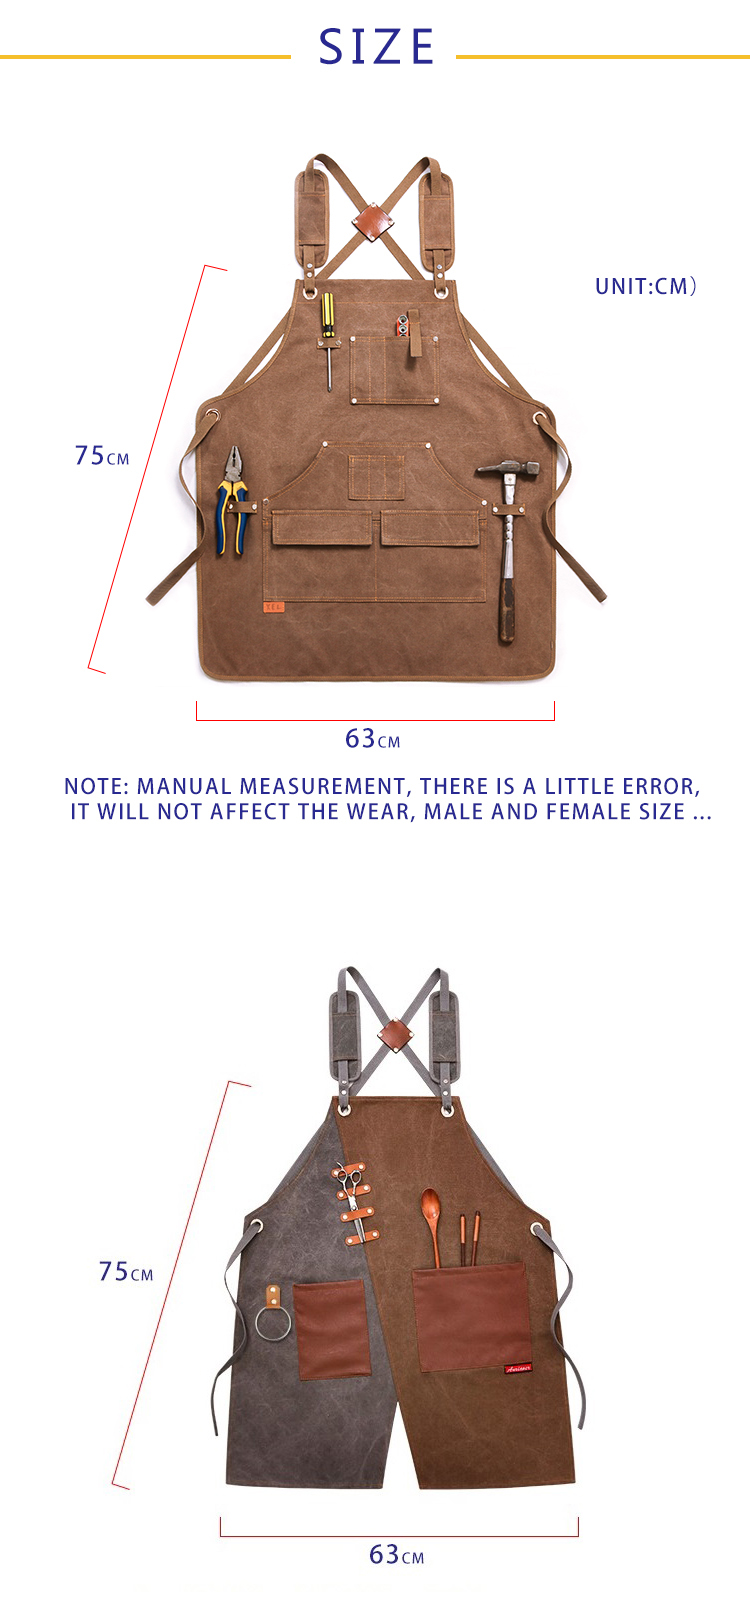 Durable-Work-Apron-Heavy-Duty-Waxed-Unisex-Canvas-Work-Apron-with-Tool-Pockets-Cross-Back-Straps-Adj-1772479-2